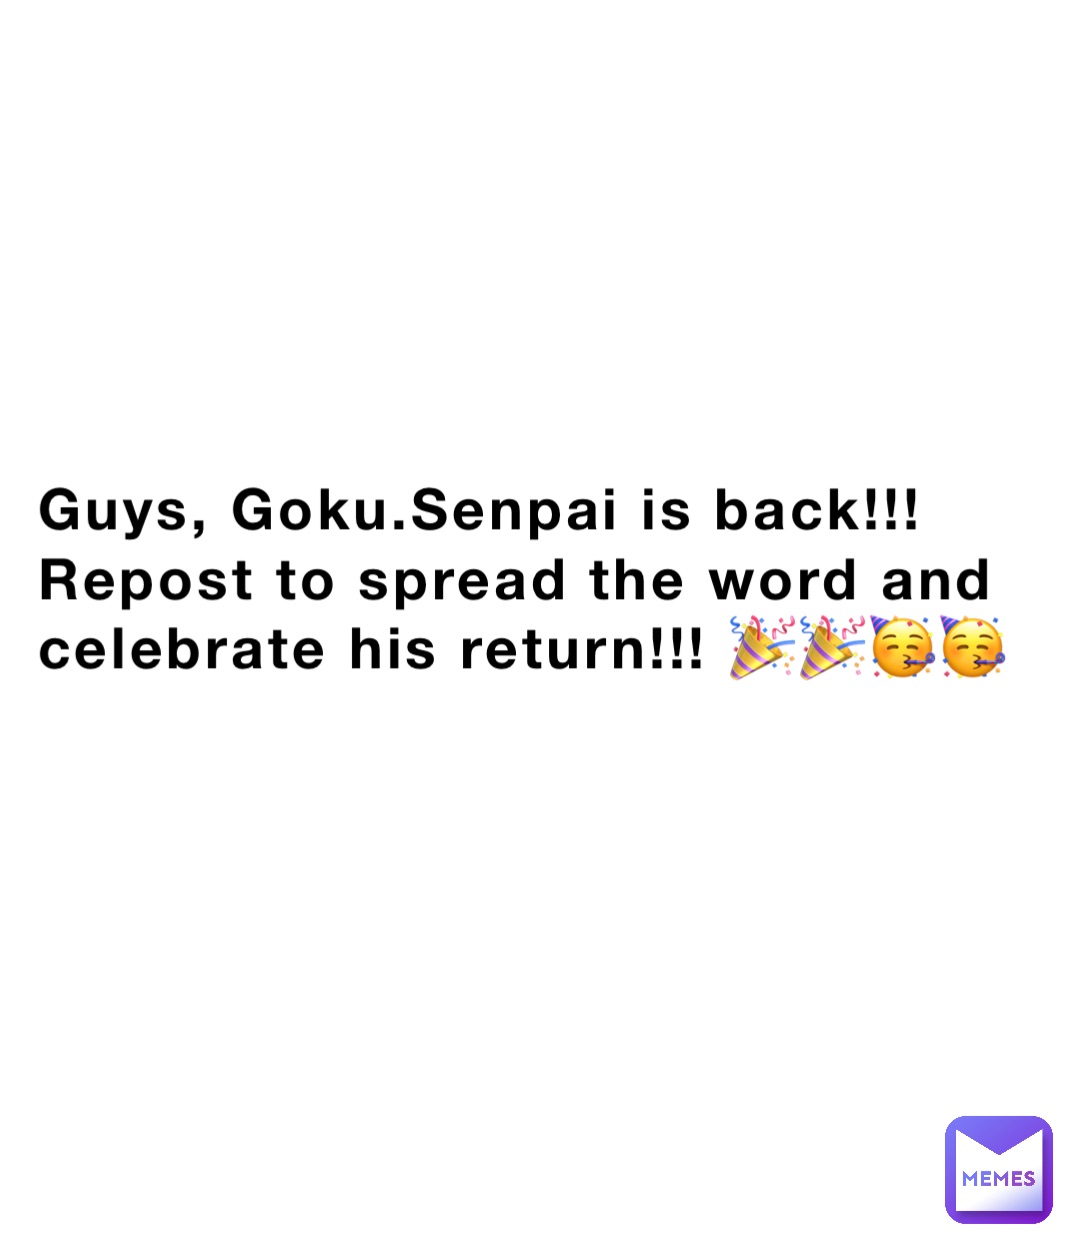 Guys, Goku.Senpai is back!!! Repost to spread the word and celebrate his return!!! 🎉🎉🥳🥳